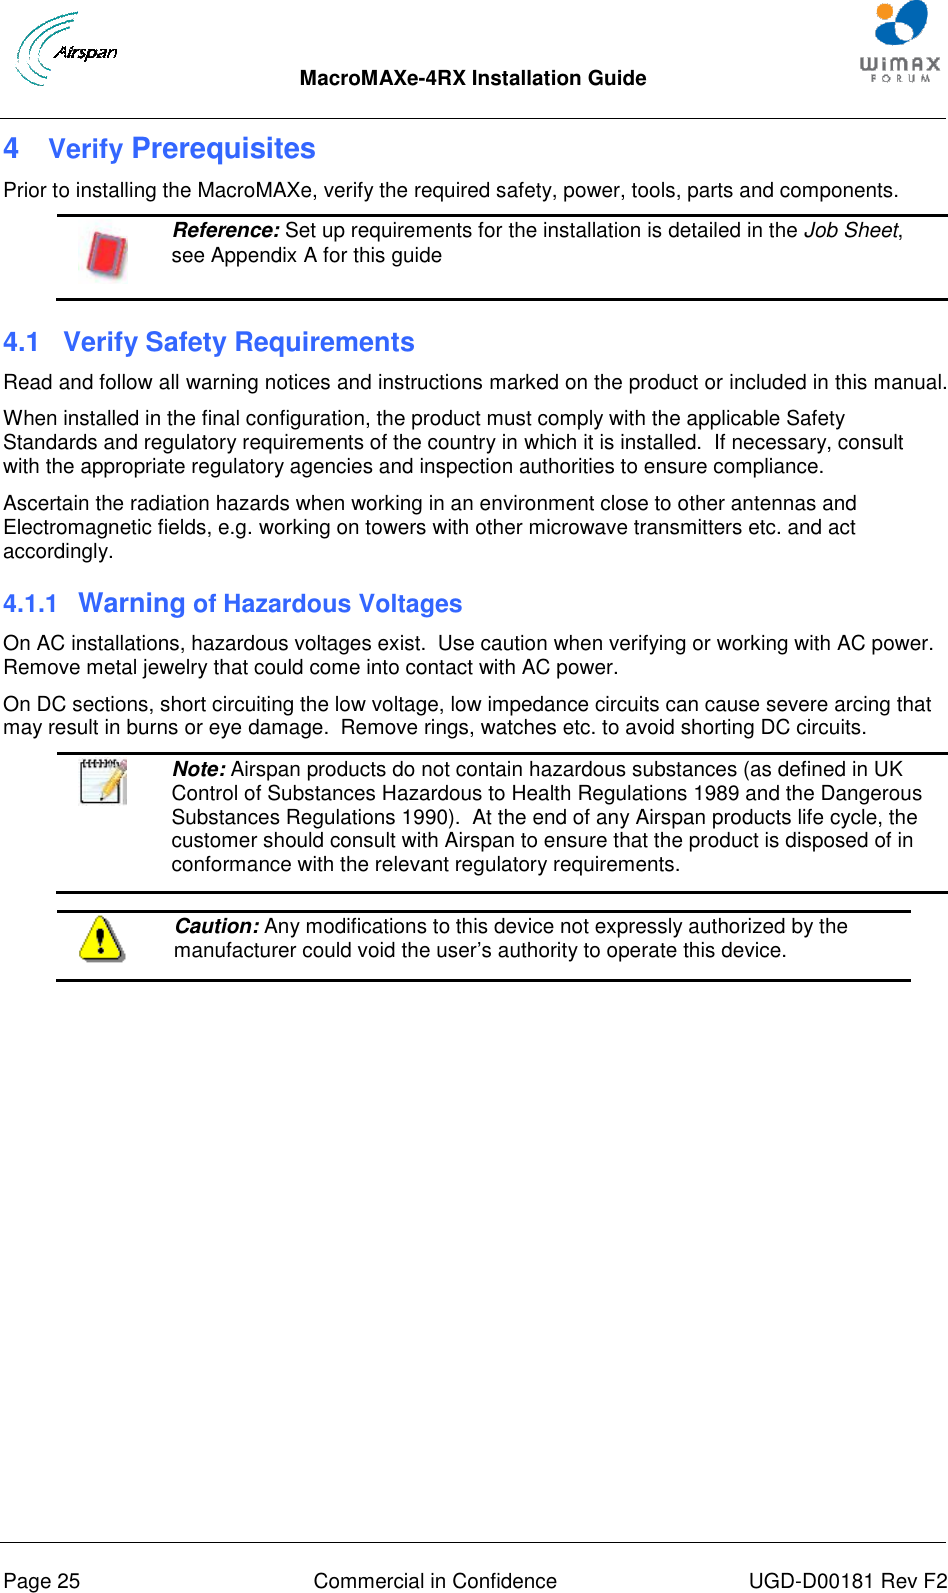  MacroMAXe-4RX Installation Guide       Page 25  Commercial in Confidence  UGD-D00181 Rev F2 4  Verify Prerequisites Prior to installing the MacroMAXe, verify the required safety, power, tools, parts and components.  Reference: Set up requirements for the installation is detailed in the Job Sheet, see Appendix A for this guide 4.1  Verify Safety Requirements Read and follow all warning notices and instructions marked on the product or included in this manual. When installed in the final configuration, the product must comply with the applicable Safety Standards and regulatory requirements of the country in which it is installed.  If necessary, consult with the appropriate regulatory agencies and inspection authorities to ensure compliance. Ascertain the radiation hazards when working in an environment close to other antennas and Electromagnetic fields, e.g. working on towers with other microwave transmitters etc. and act accordingly. 4.1.1  Warning of Hazardous Voltages On AC installations, hazardous voltages exist.  Use caution when verifying or working with AC power.  Remove metal jewelry that could come into contact with AC power. On DC sections, short circuiting the low voltage, low impedance circuits can cause severe arcing that may result in burns or eye damage.  Remove rings, watches etc. to avoid shorting DC circuits.   Note: Airspan products do not contain hazardous substances (as defined in UK Control of Substances Hazardous to Health Regulations 1989 and the Dangerous Substances Regulations 1990).  At the end of any Airspan products life cycle, the customer should consult with Airspan to ensure that the product is disposed of in conformance with the relevant regulatory requirements.   Caution: Any modifications to this device not expressly authorized by the manufacturer could void the user‟s authority to operate this device.  